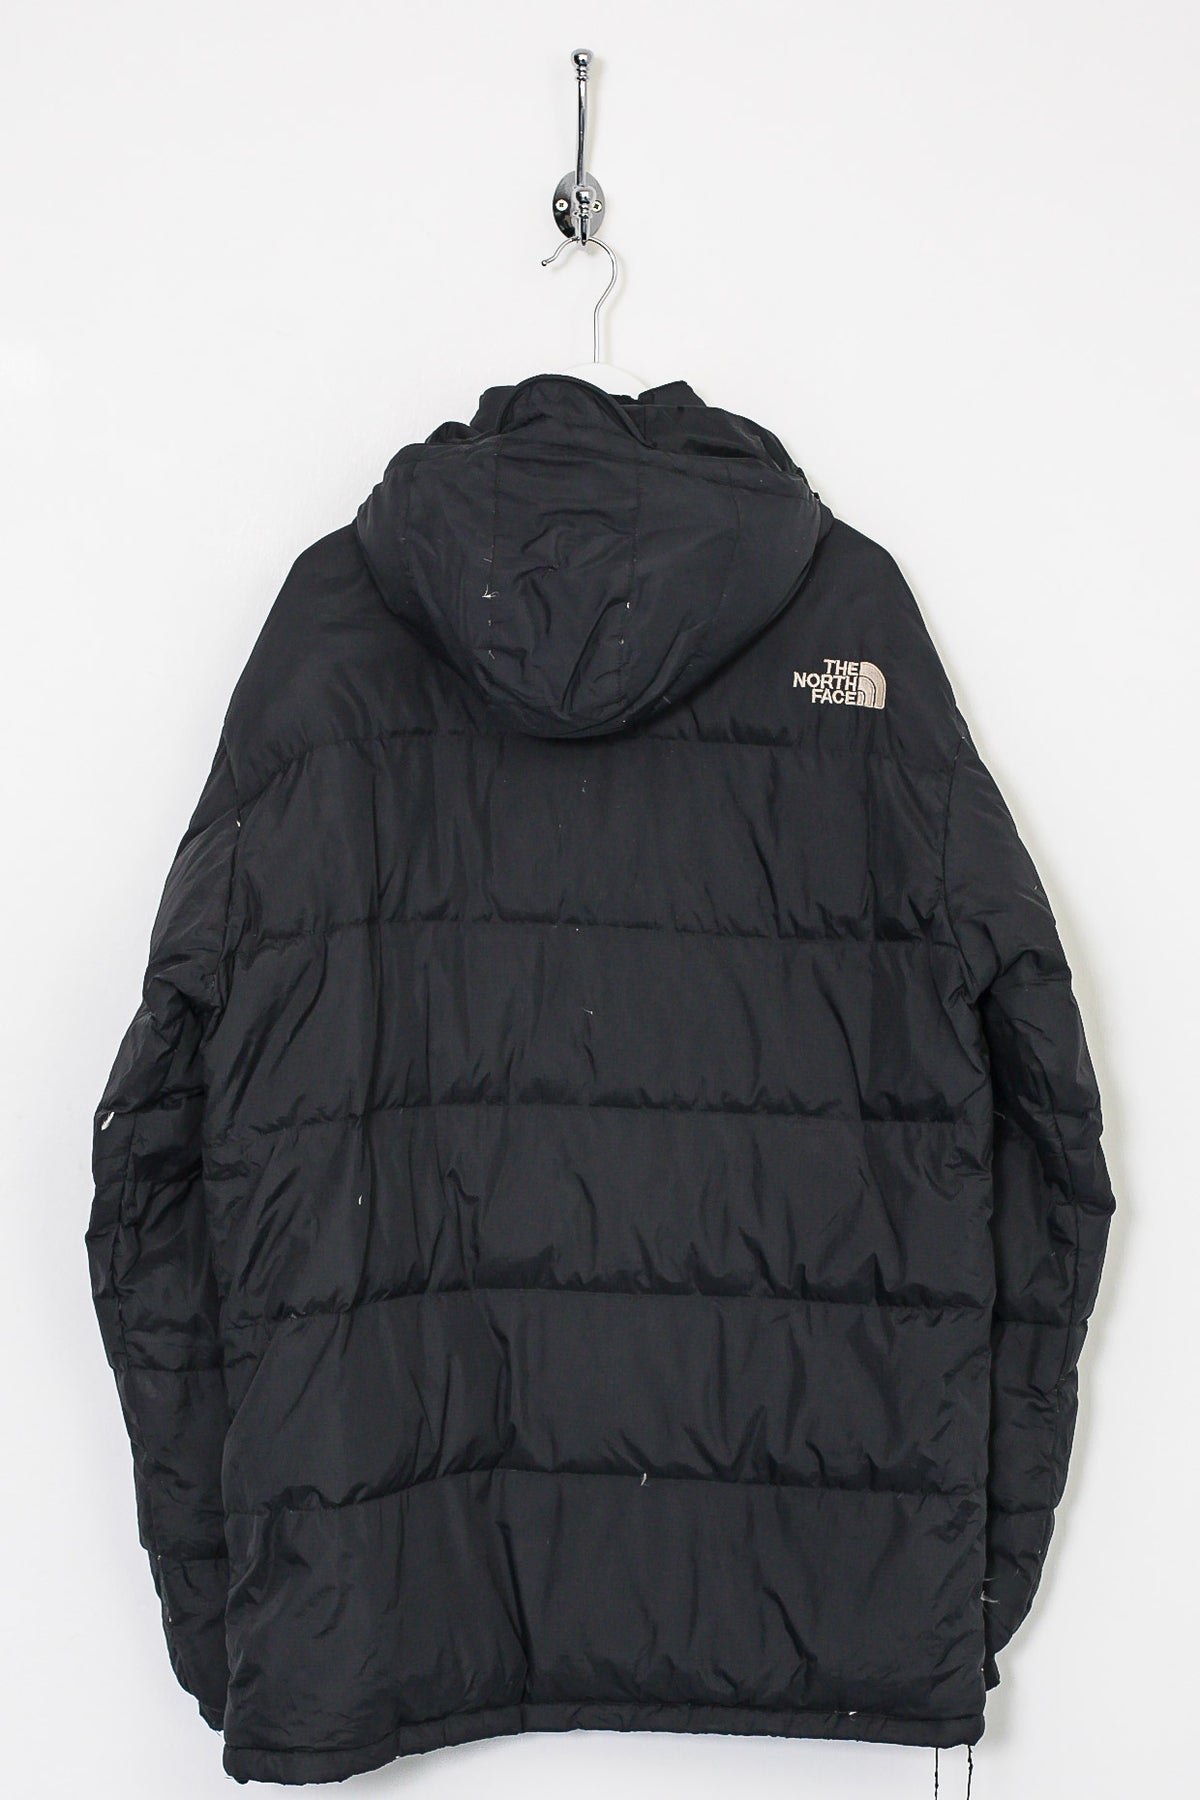 The North Face 900 Fill Summit Series Puffer Jacket (L) – Stocked